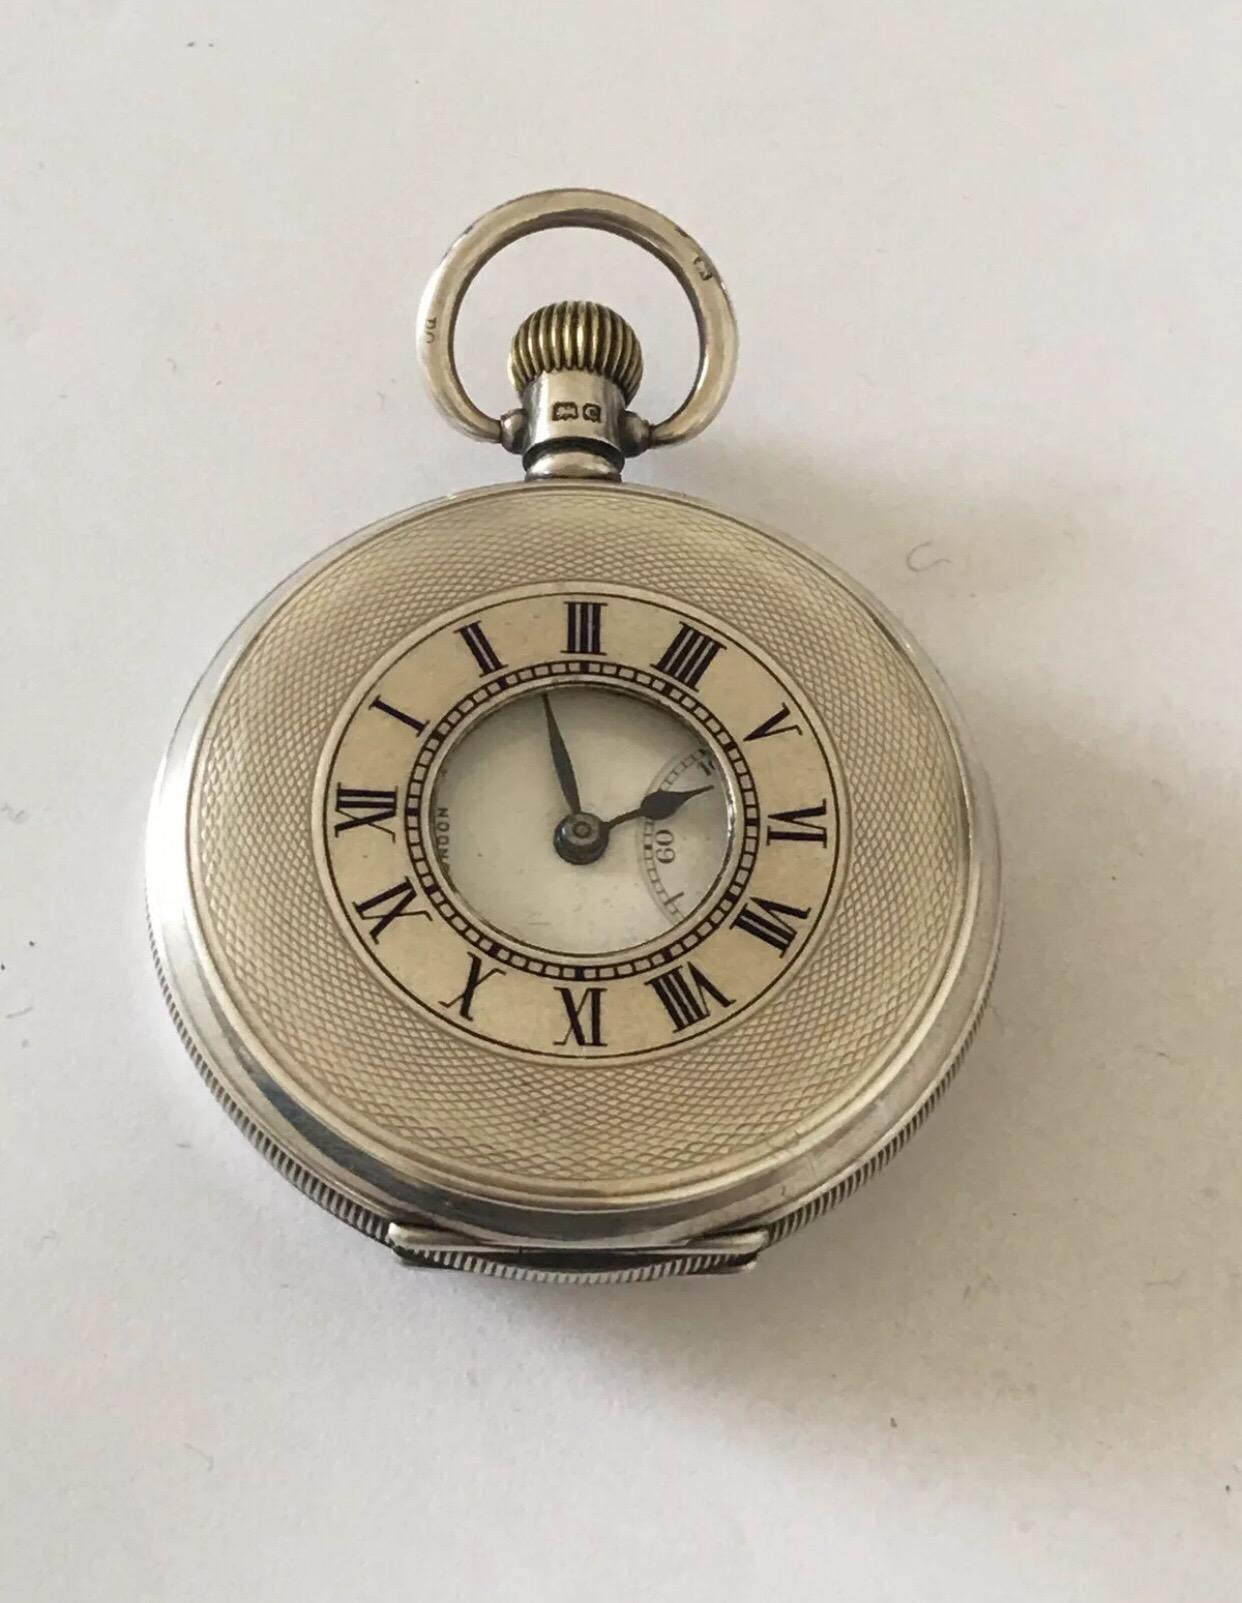 
Antique Full Hunter Engine Turned Case Silver Pocket Watch J.W. Benson London.


This watch is in good working condition. Beautiful engine turned silver full hunter case. The top cover glass missing